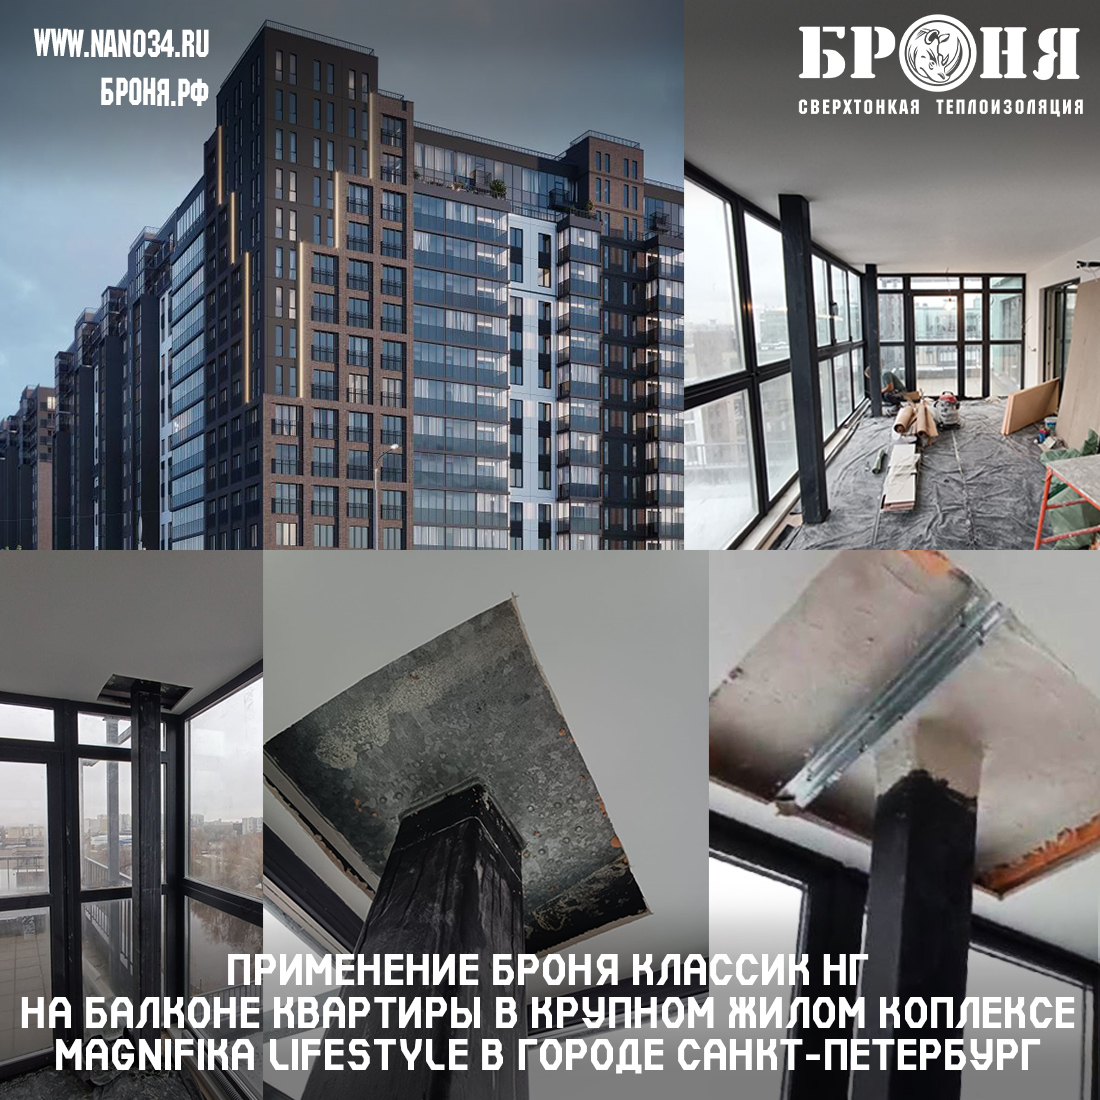 Application of Bronya Classic NF on the balcony of an apartment in a large residential complex Magnifika Lifestyle in St. Petersburg (photo and video)